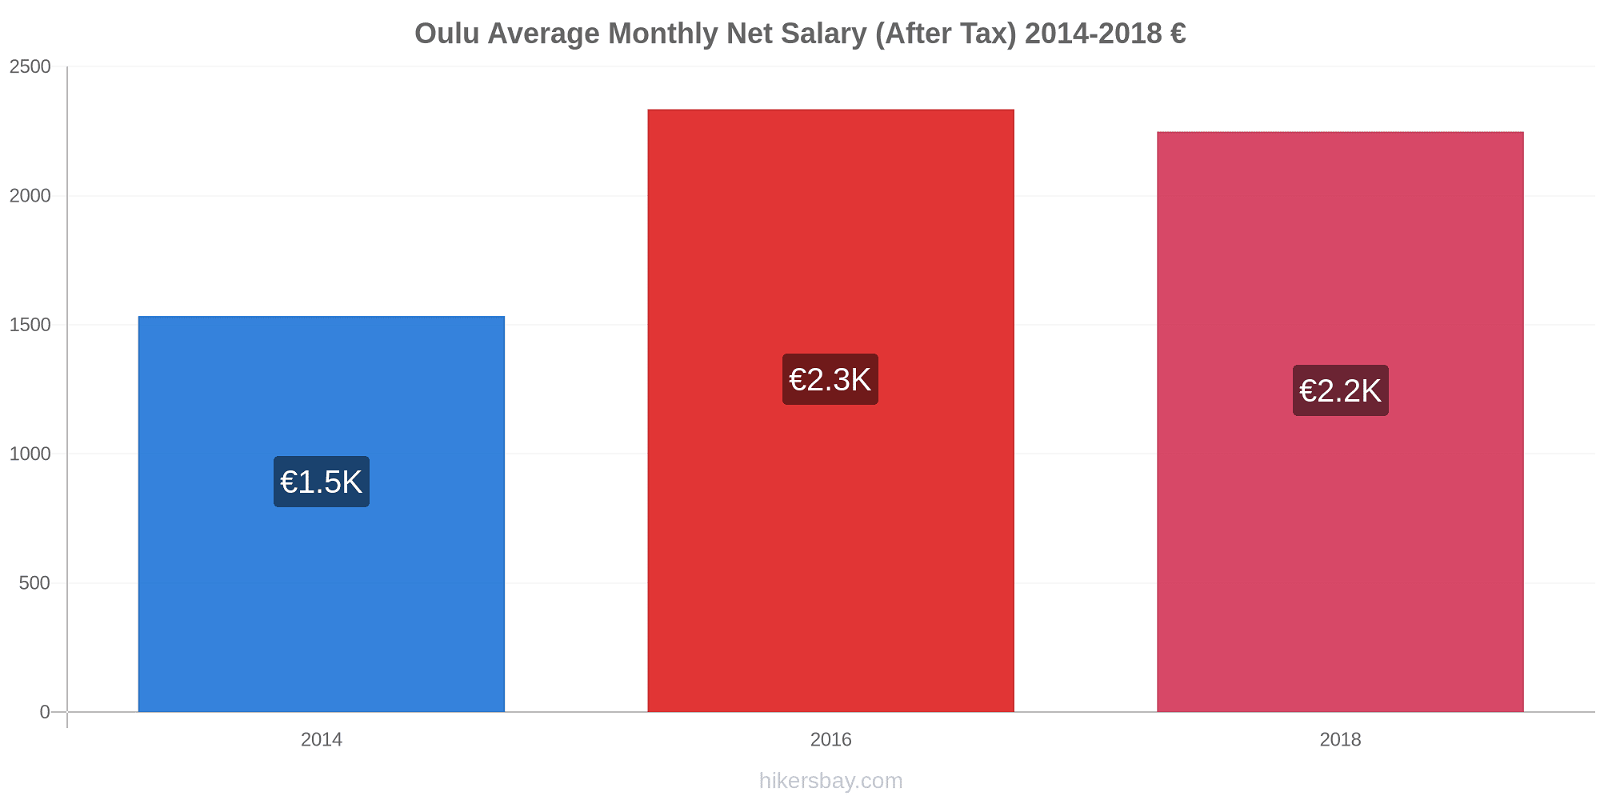 Oulu price changes Average Monthly Net Salary (After Tax) hikersbay.com